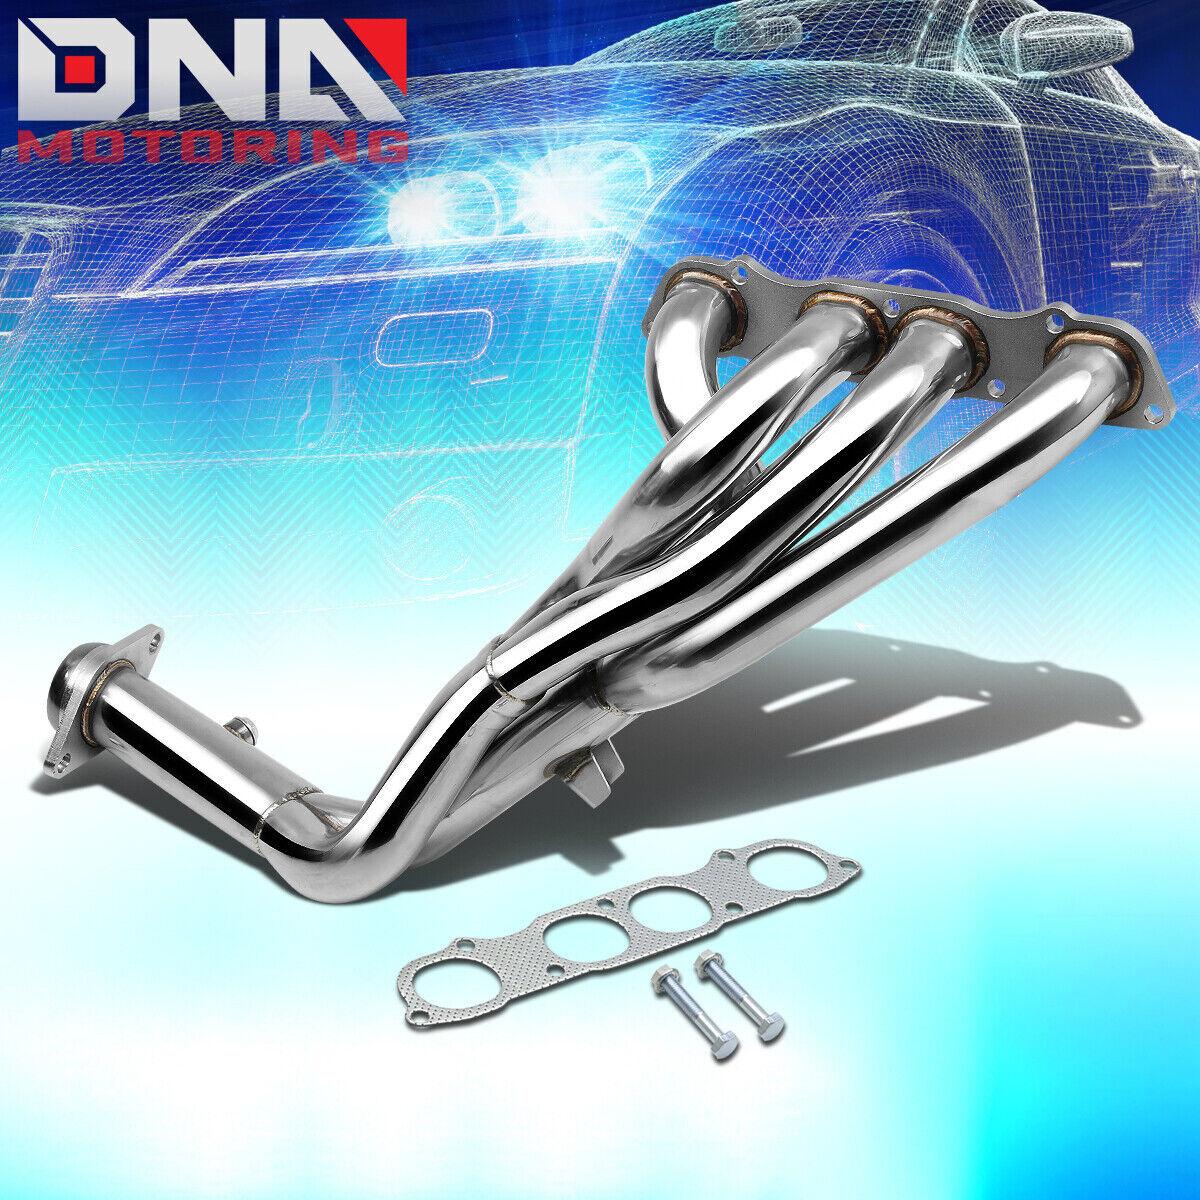 STAINLESS STEEL 4-2-1 HEADER FOR 00-09 S2000 AP1/AP2 2.0/2.2L EXHAUST/MANIFOLD